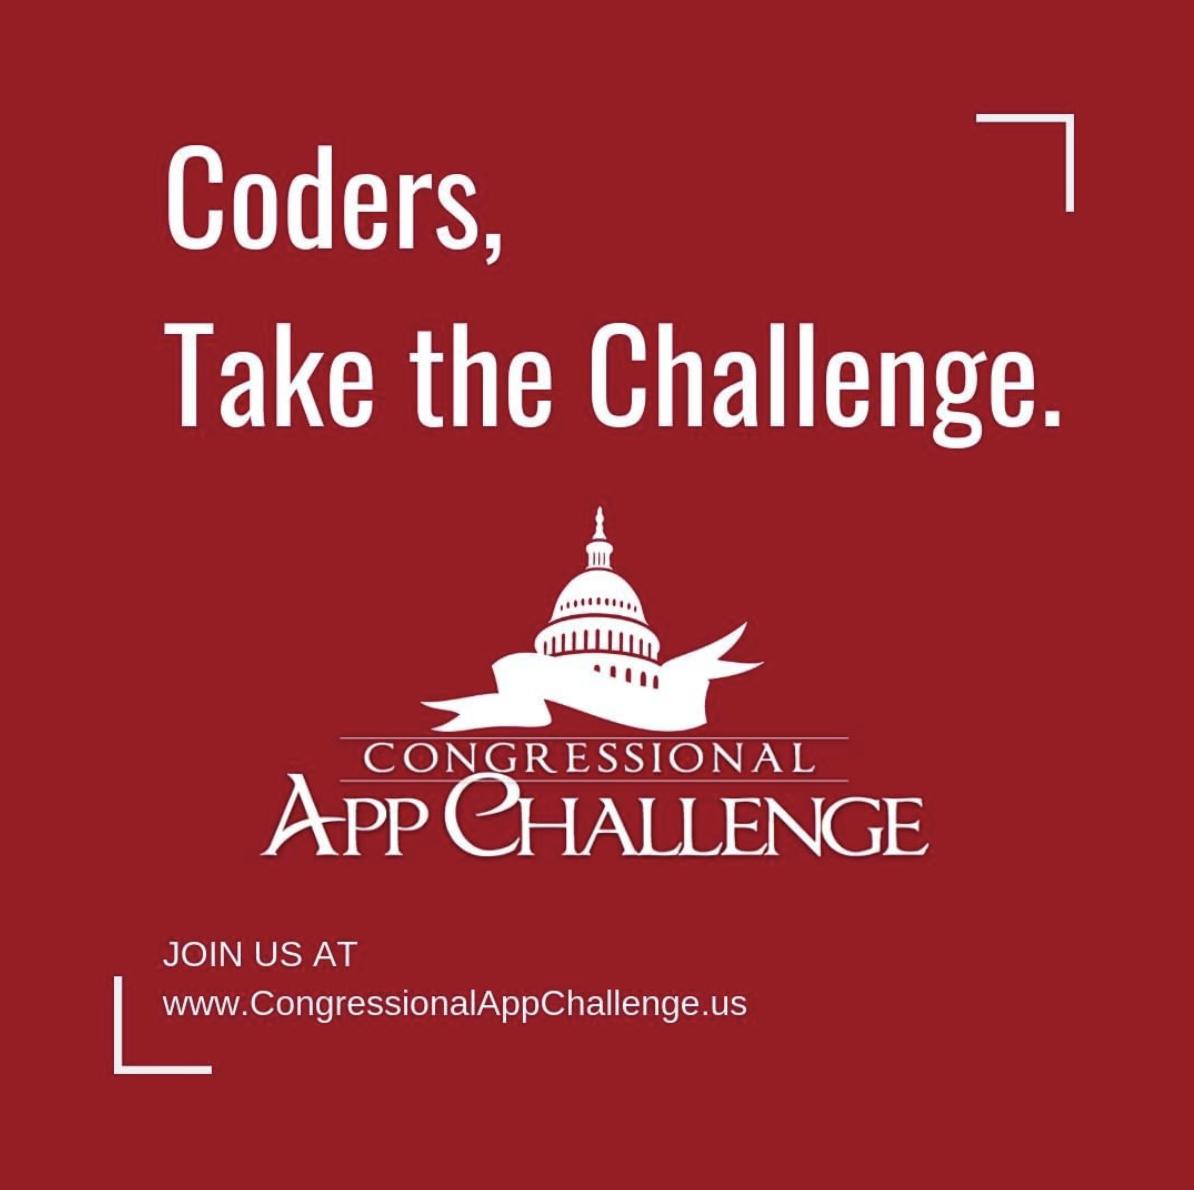 Code your future! The #CongressionalAppChallenge inspires students to code, engages Members of Congress, and reaches every corner of #America. Teacher, students learn more here: bit.ly/2Kdwhkh #CodeforCongress 📸: @CongressionalAC #civicseducation #STEM